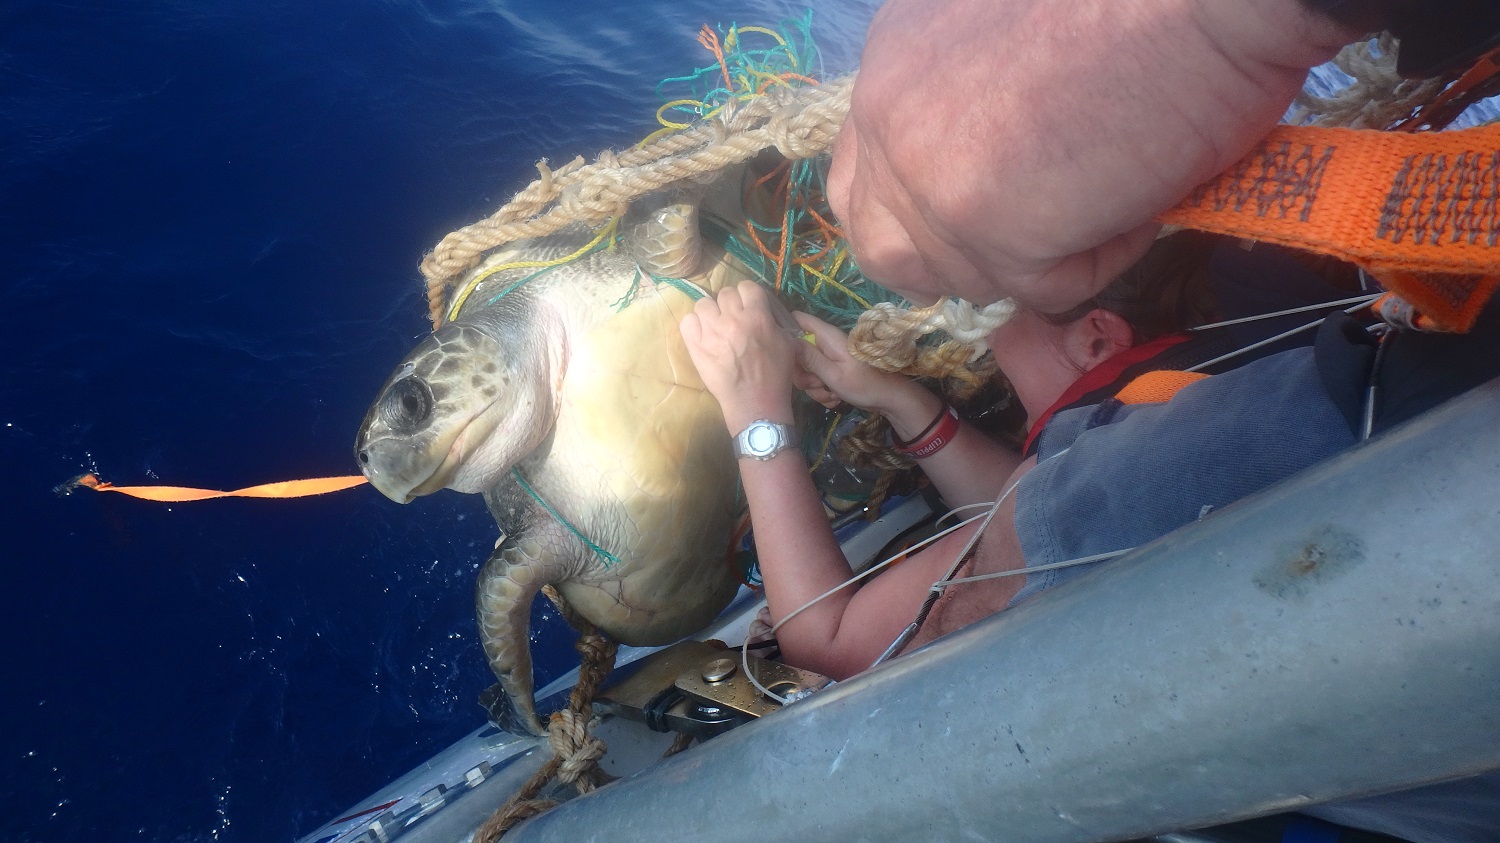 The PSP crew shown helping to free a turtle from plastic waste 